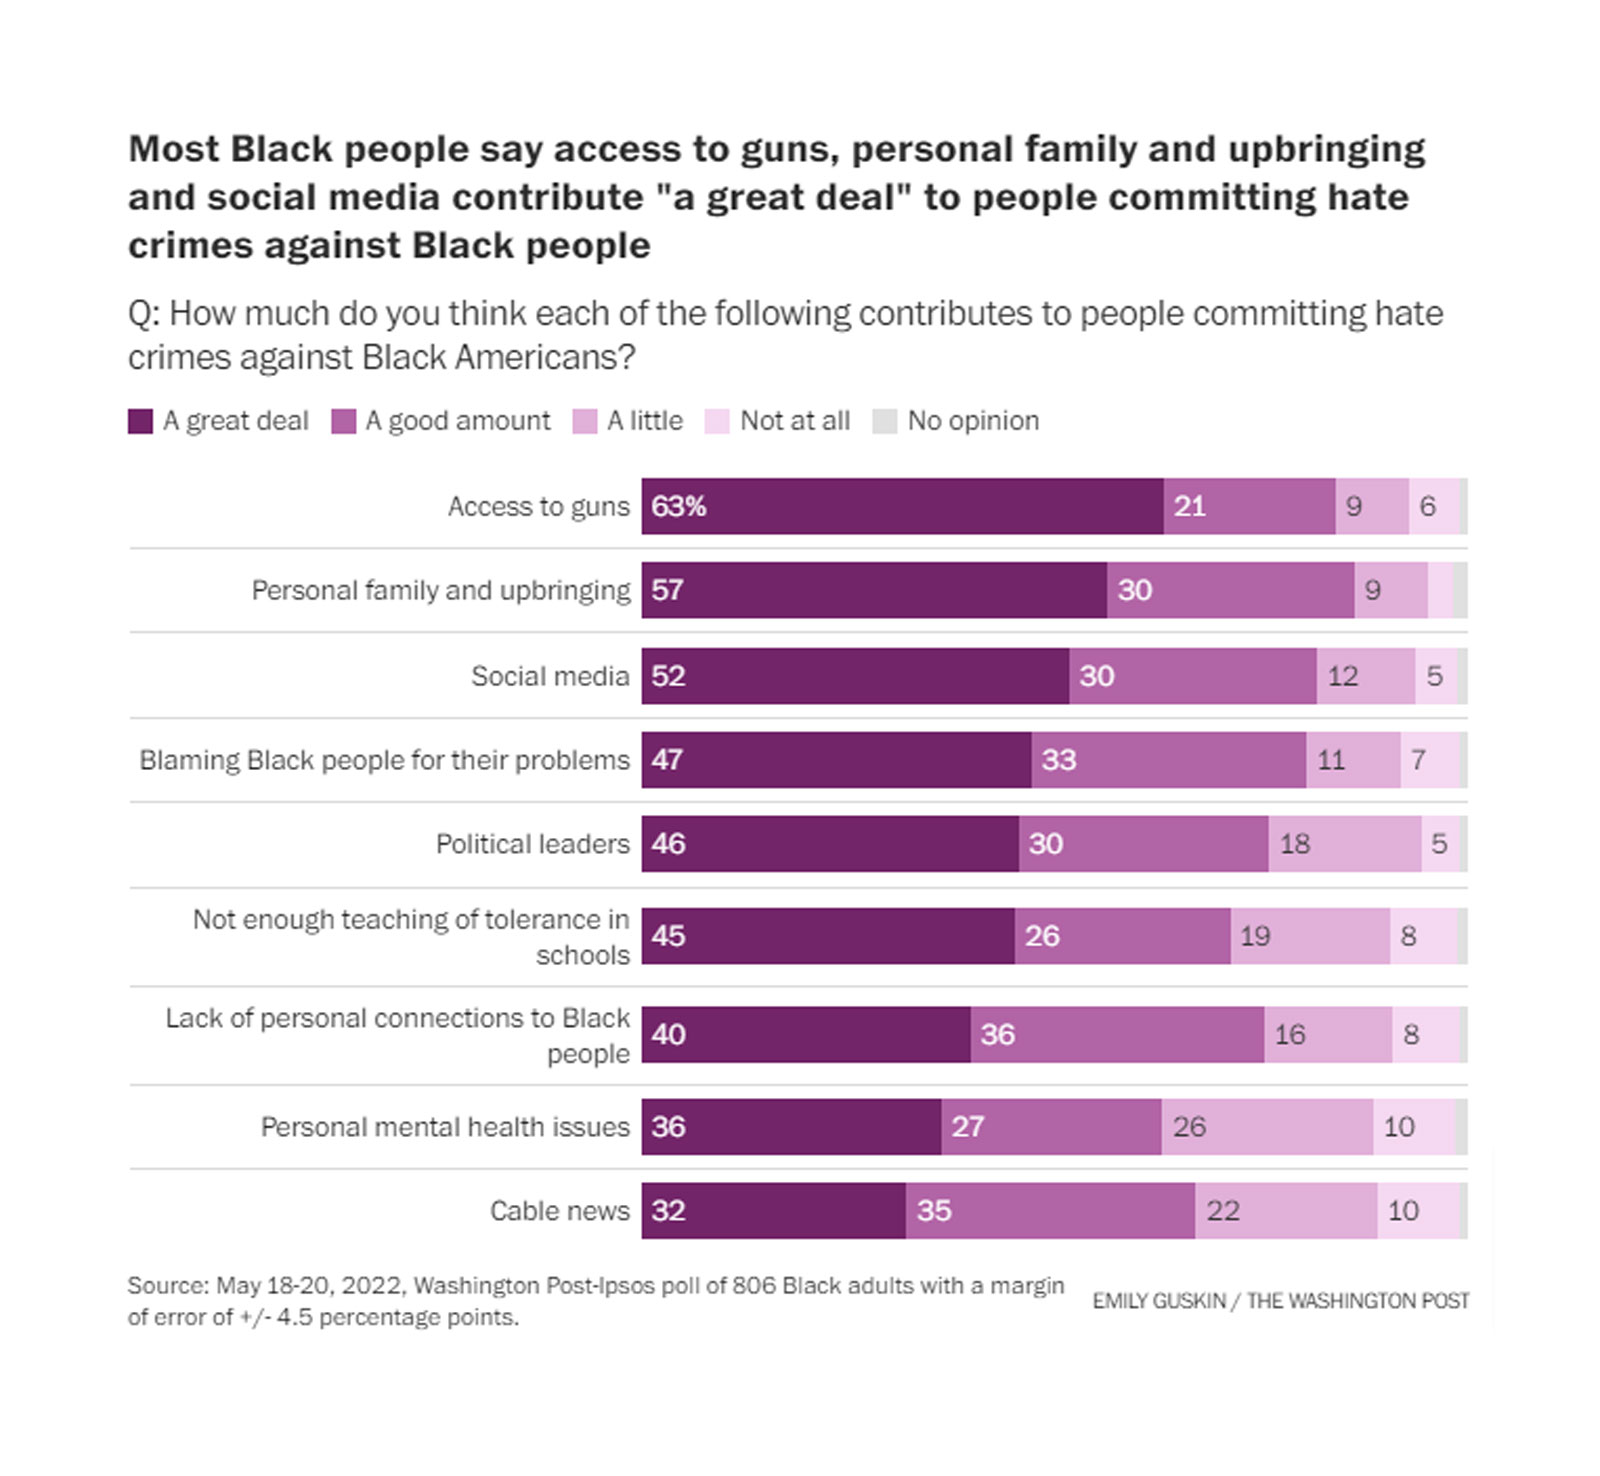 Most Black people say access to guns, personal family and upbringing and social media contribute "a great deal" to people committing hate crimes against Black people